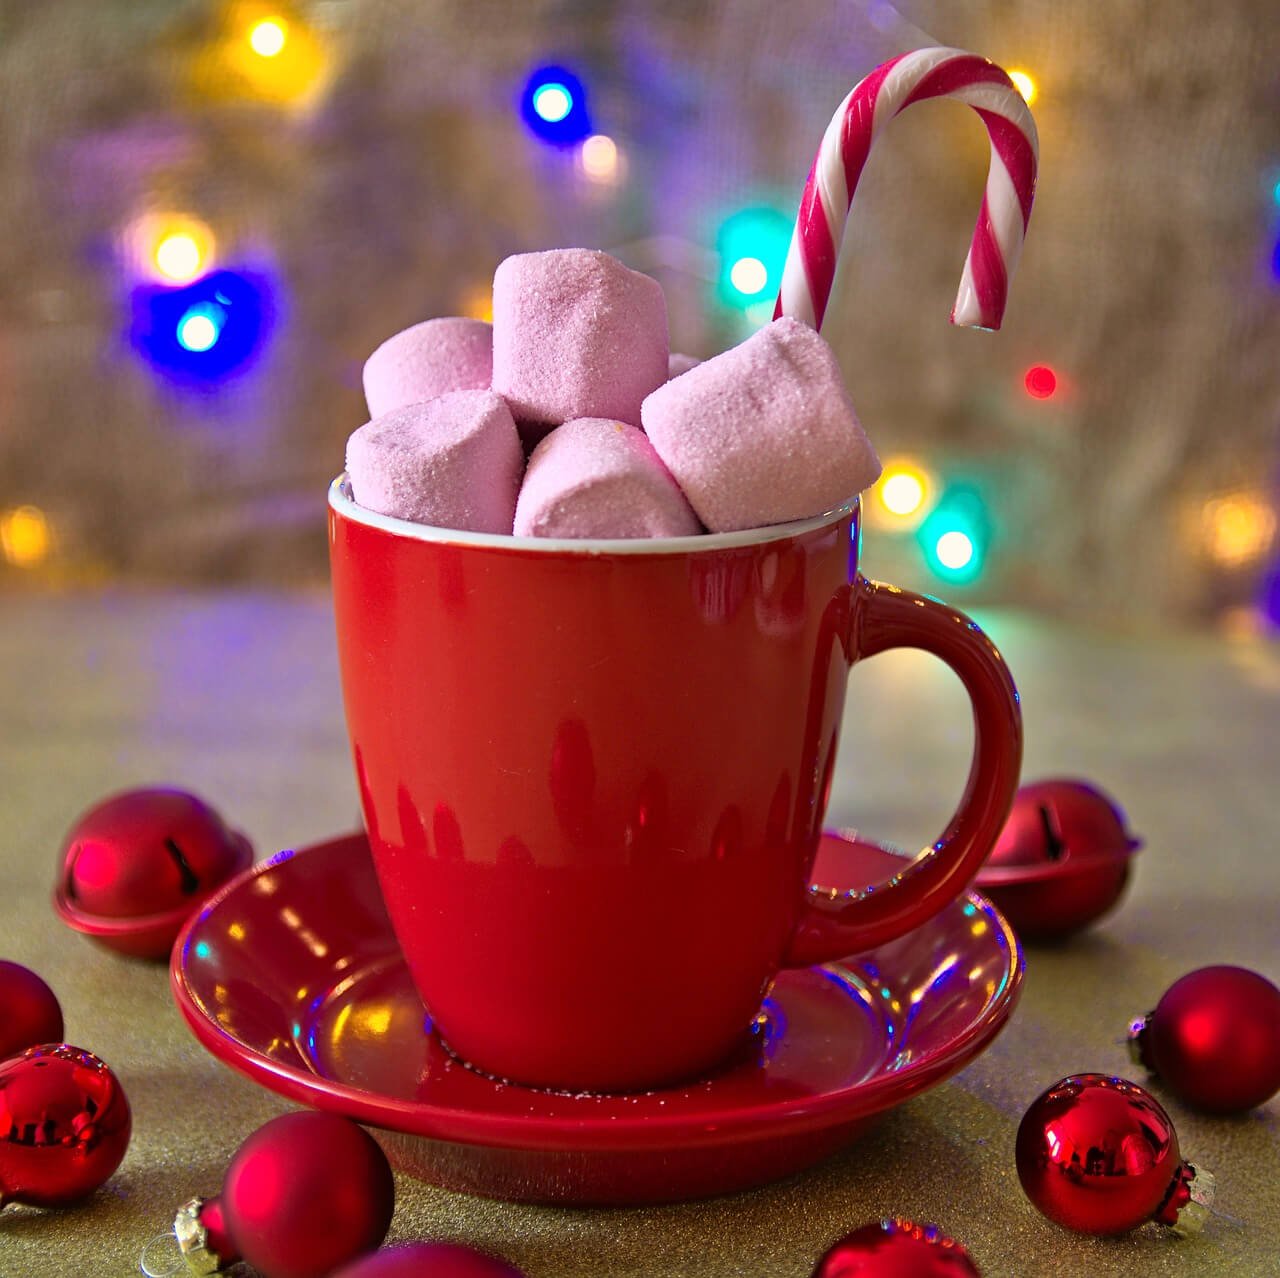 A mini candy can ein a red cup topped with marshmallows, surrounded by Christmas baubles and lights